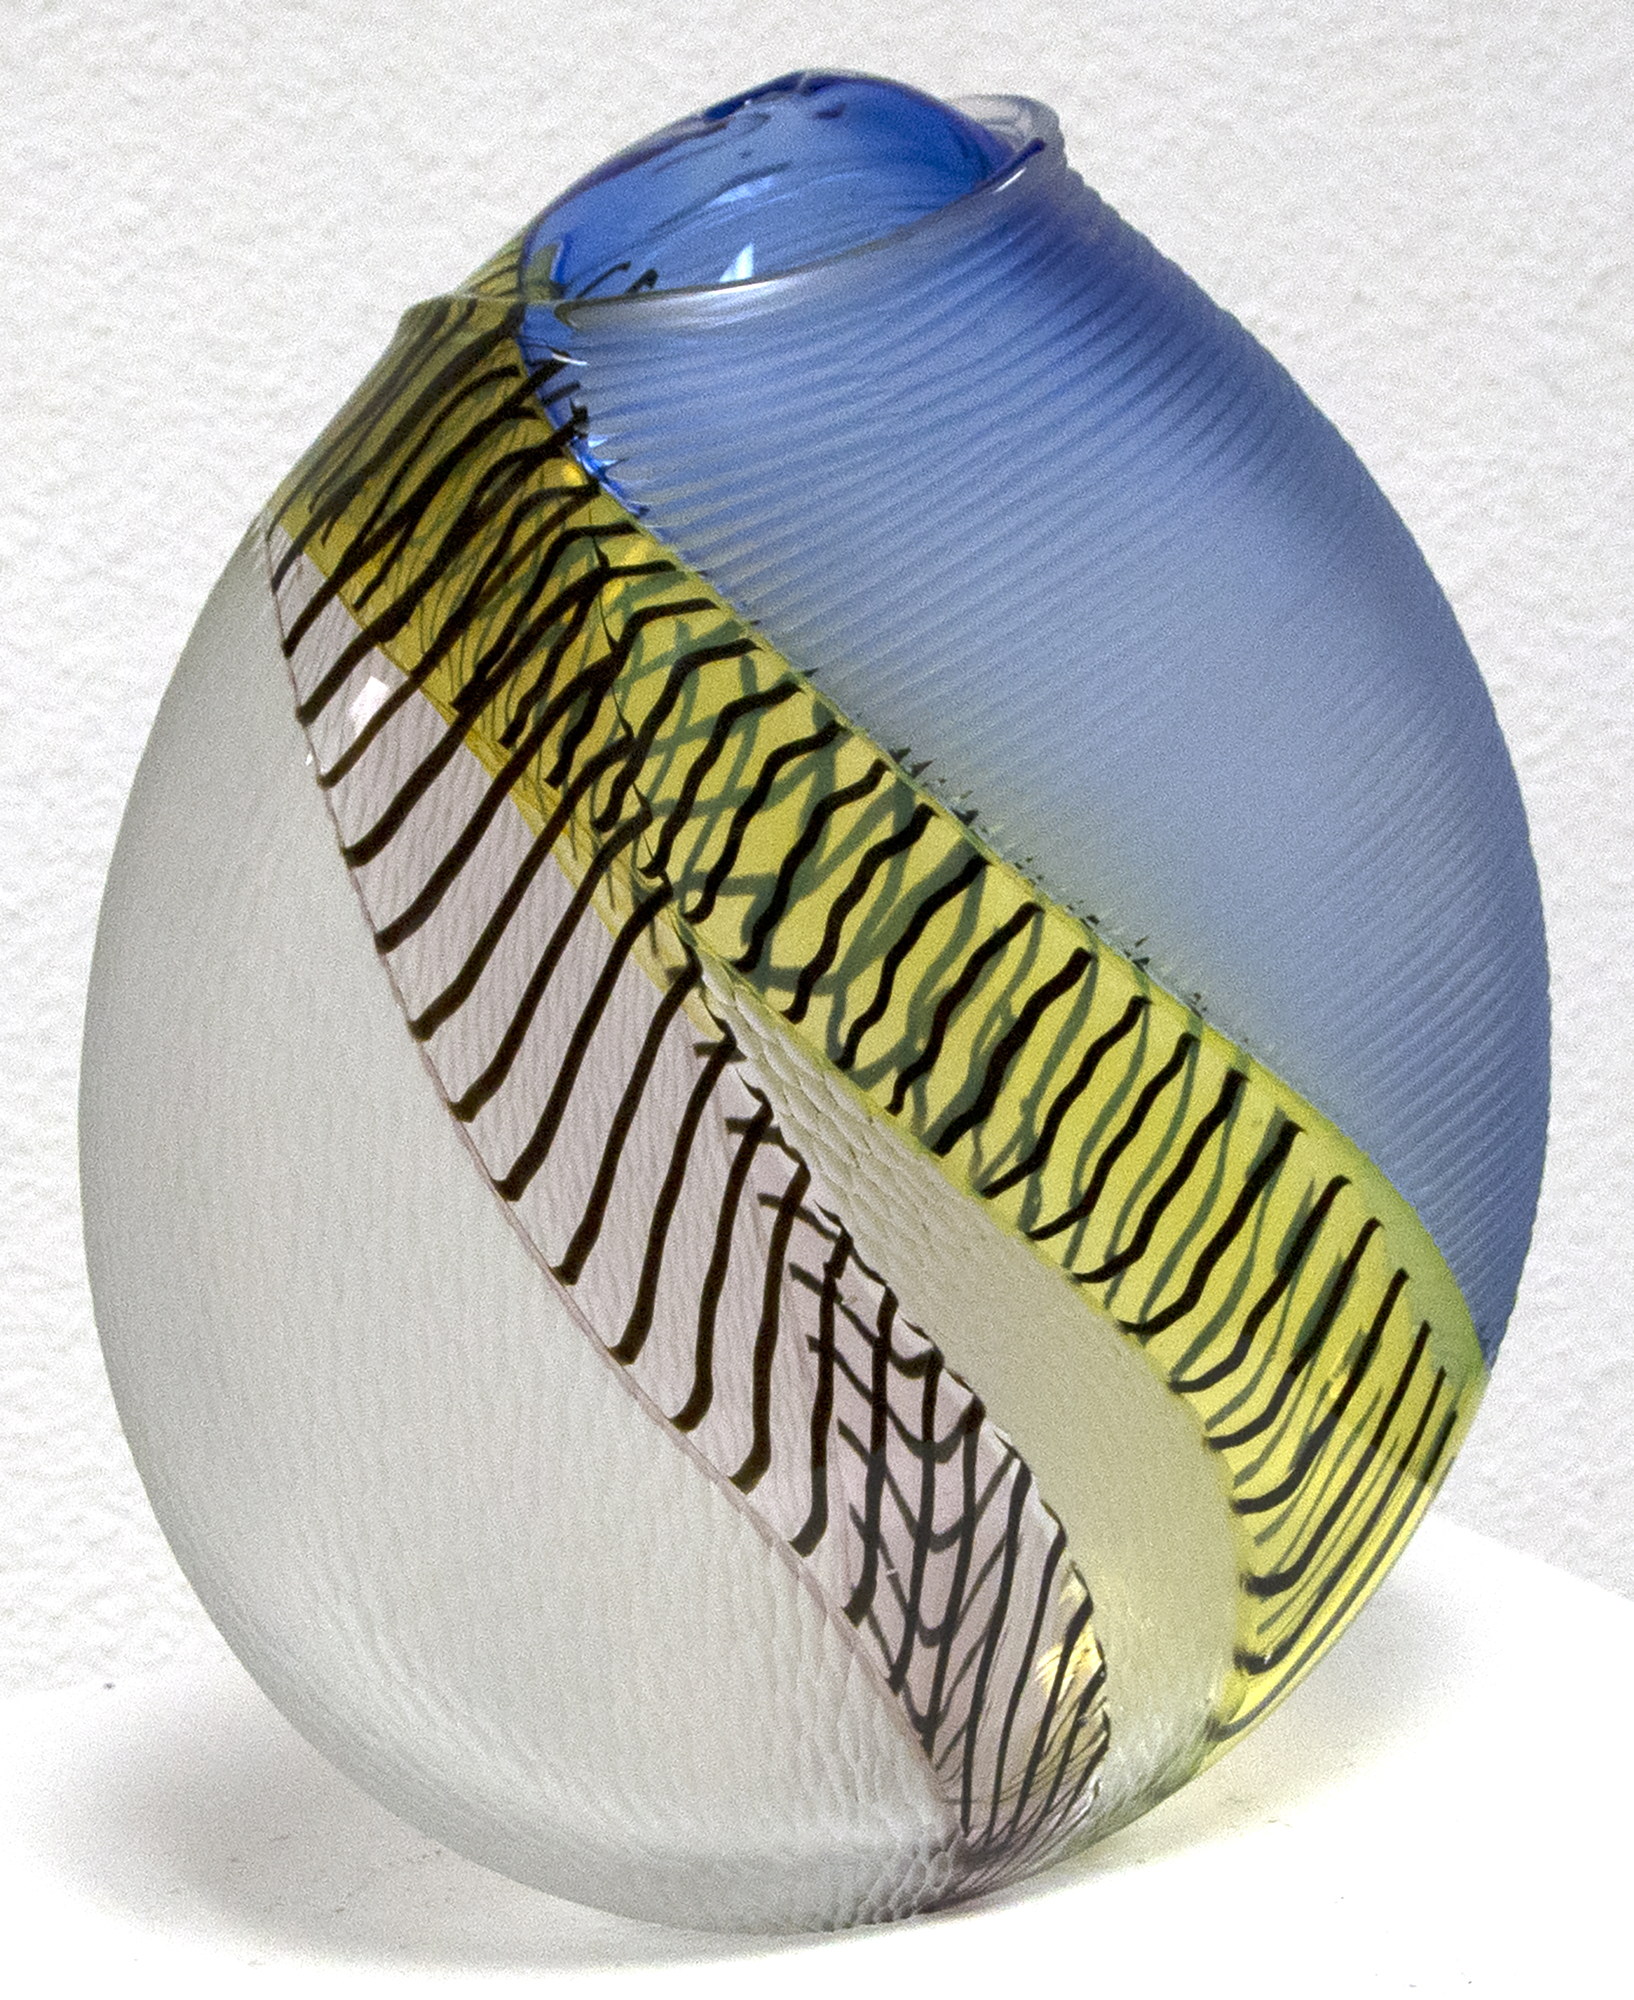 Hand blown glass with multiple incalmo of colored glass and filligrana. Switching the axel of the glass bubble and adjoining two glass bubbles with raticallo technique. Engraved partially on the surface with different patterns.
<br>
<br>Lino Tagliapietra, a native to Murano, is one of the world's preeminent glass artists.